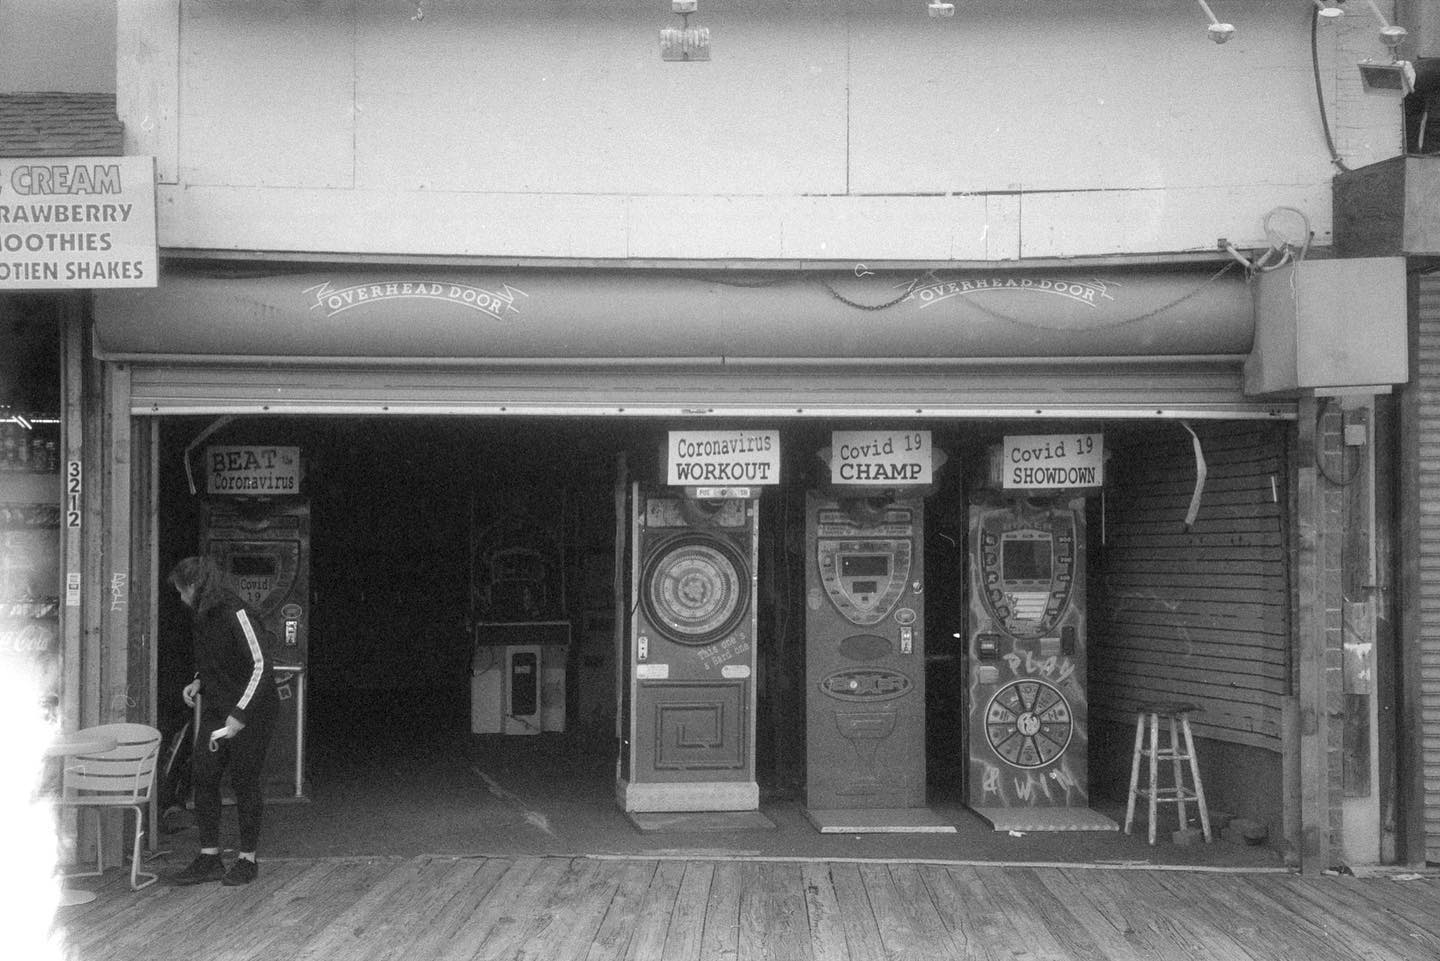 COVID-19 Showdown

This arcade on the boardwalk in Wildwood has adapted to the current situation. #contaxiii #film #filmphotography #filmisnotdead #shootfilmstaybroke #wildwood #wildwoodnj #allthroughalenspodcast